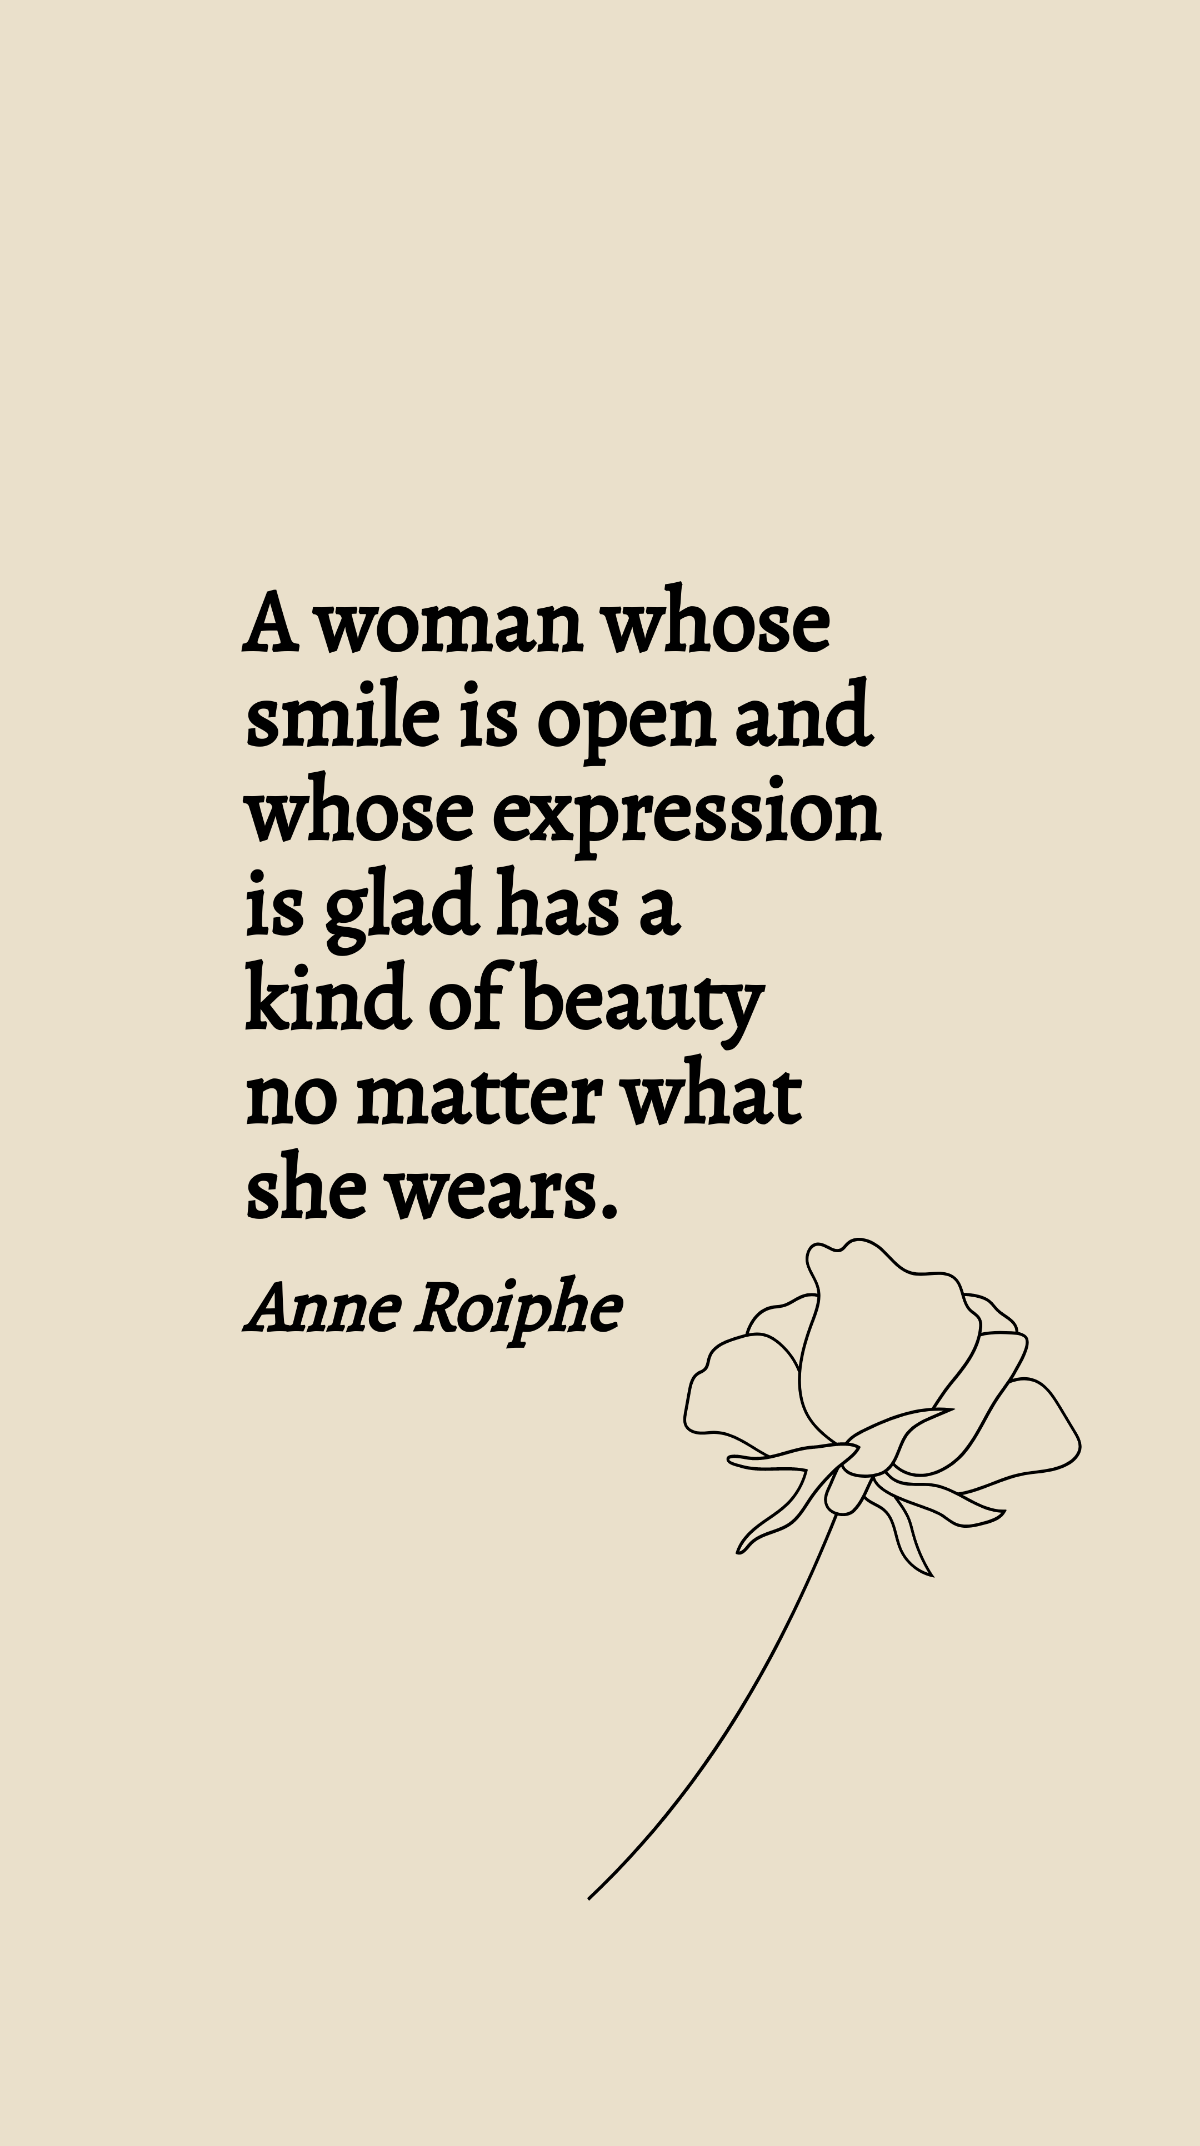 Anne Roiphe - A woman whose smile is open and whose expression is glad has a kind of beauty no matter what she wears. Template